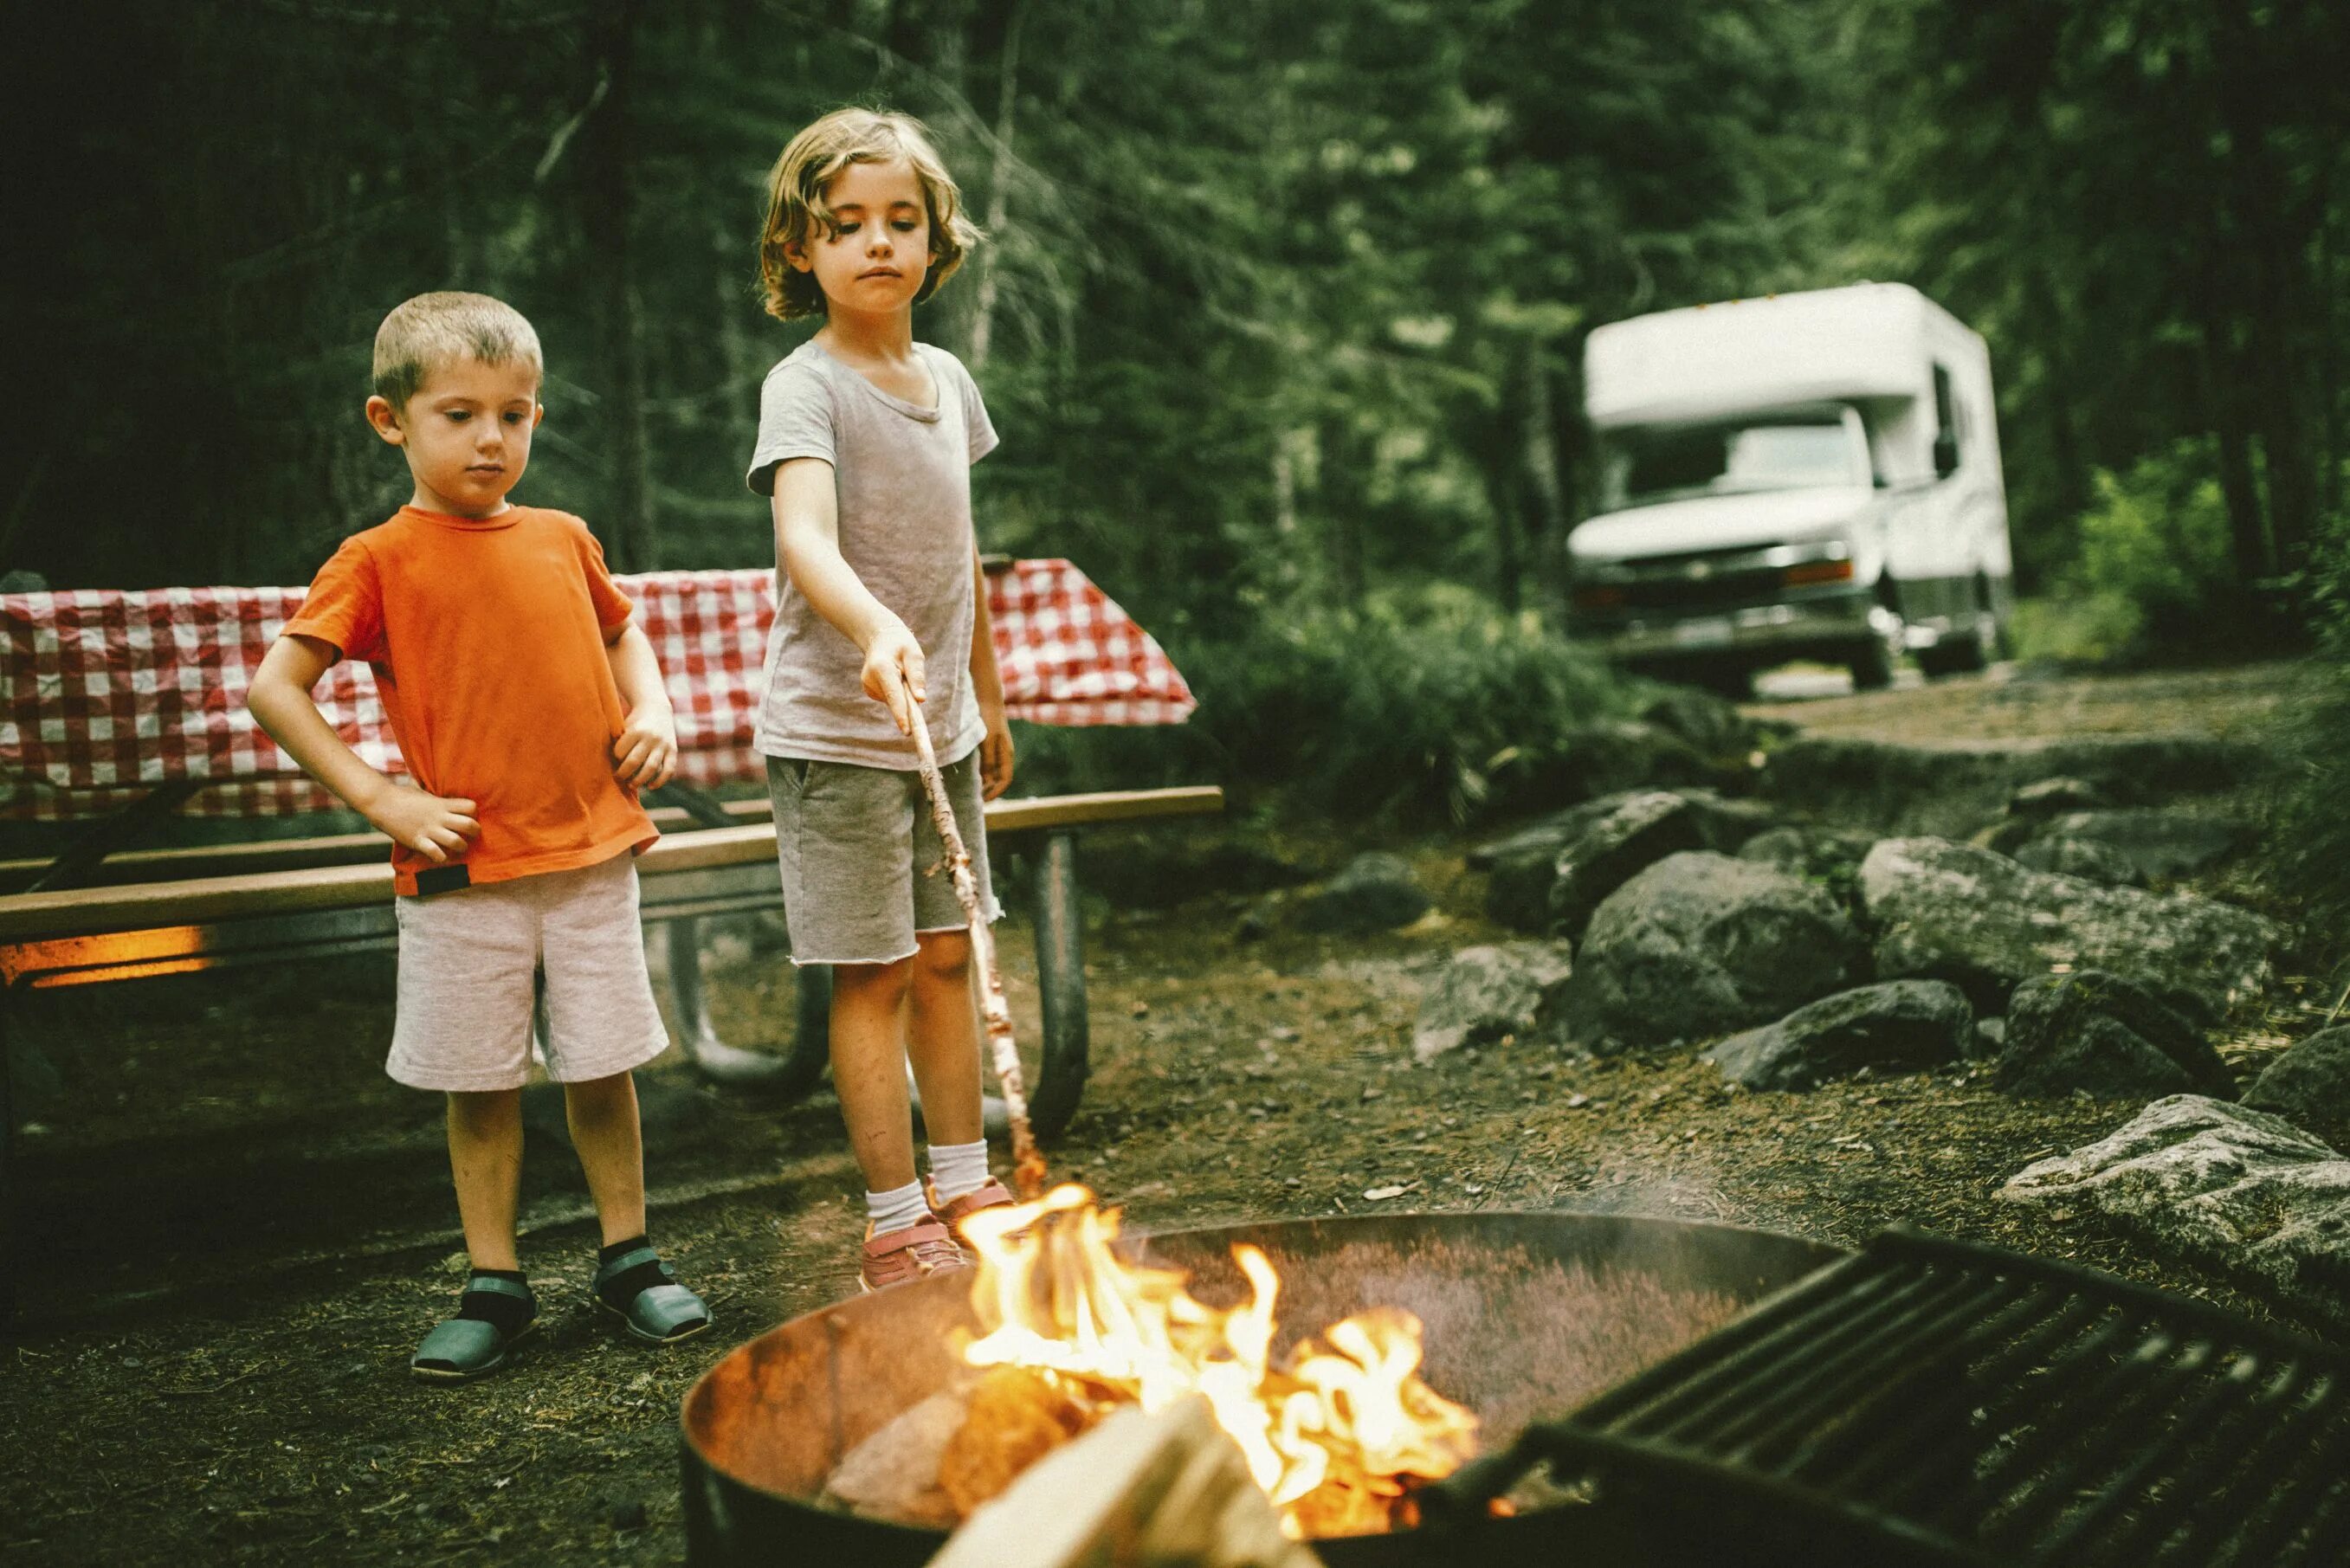 Little camp. Camping with Kids. Bonfire with Kids. Lil Campers. Kid with Road.